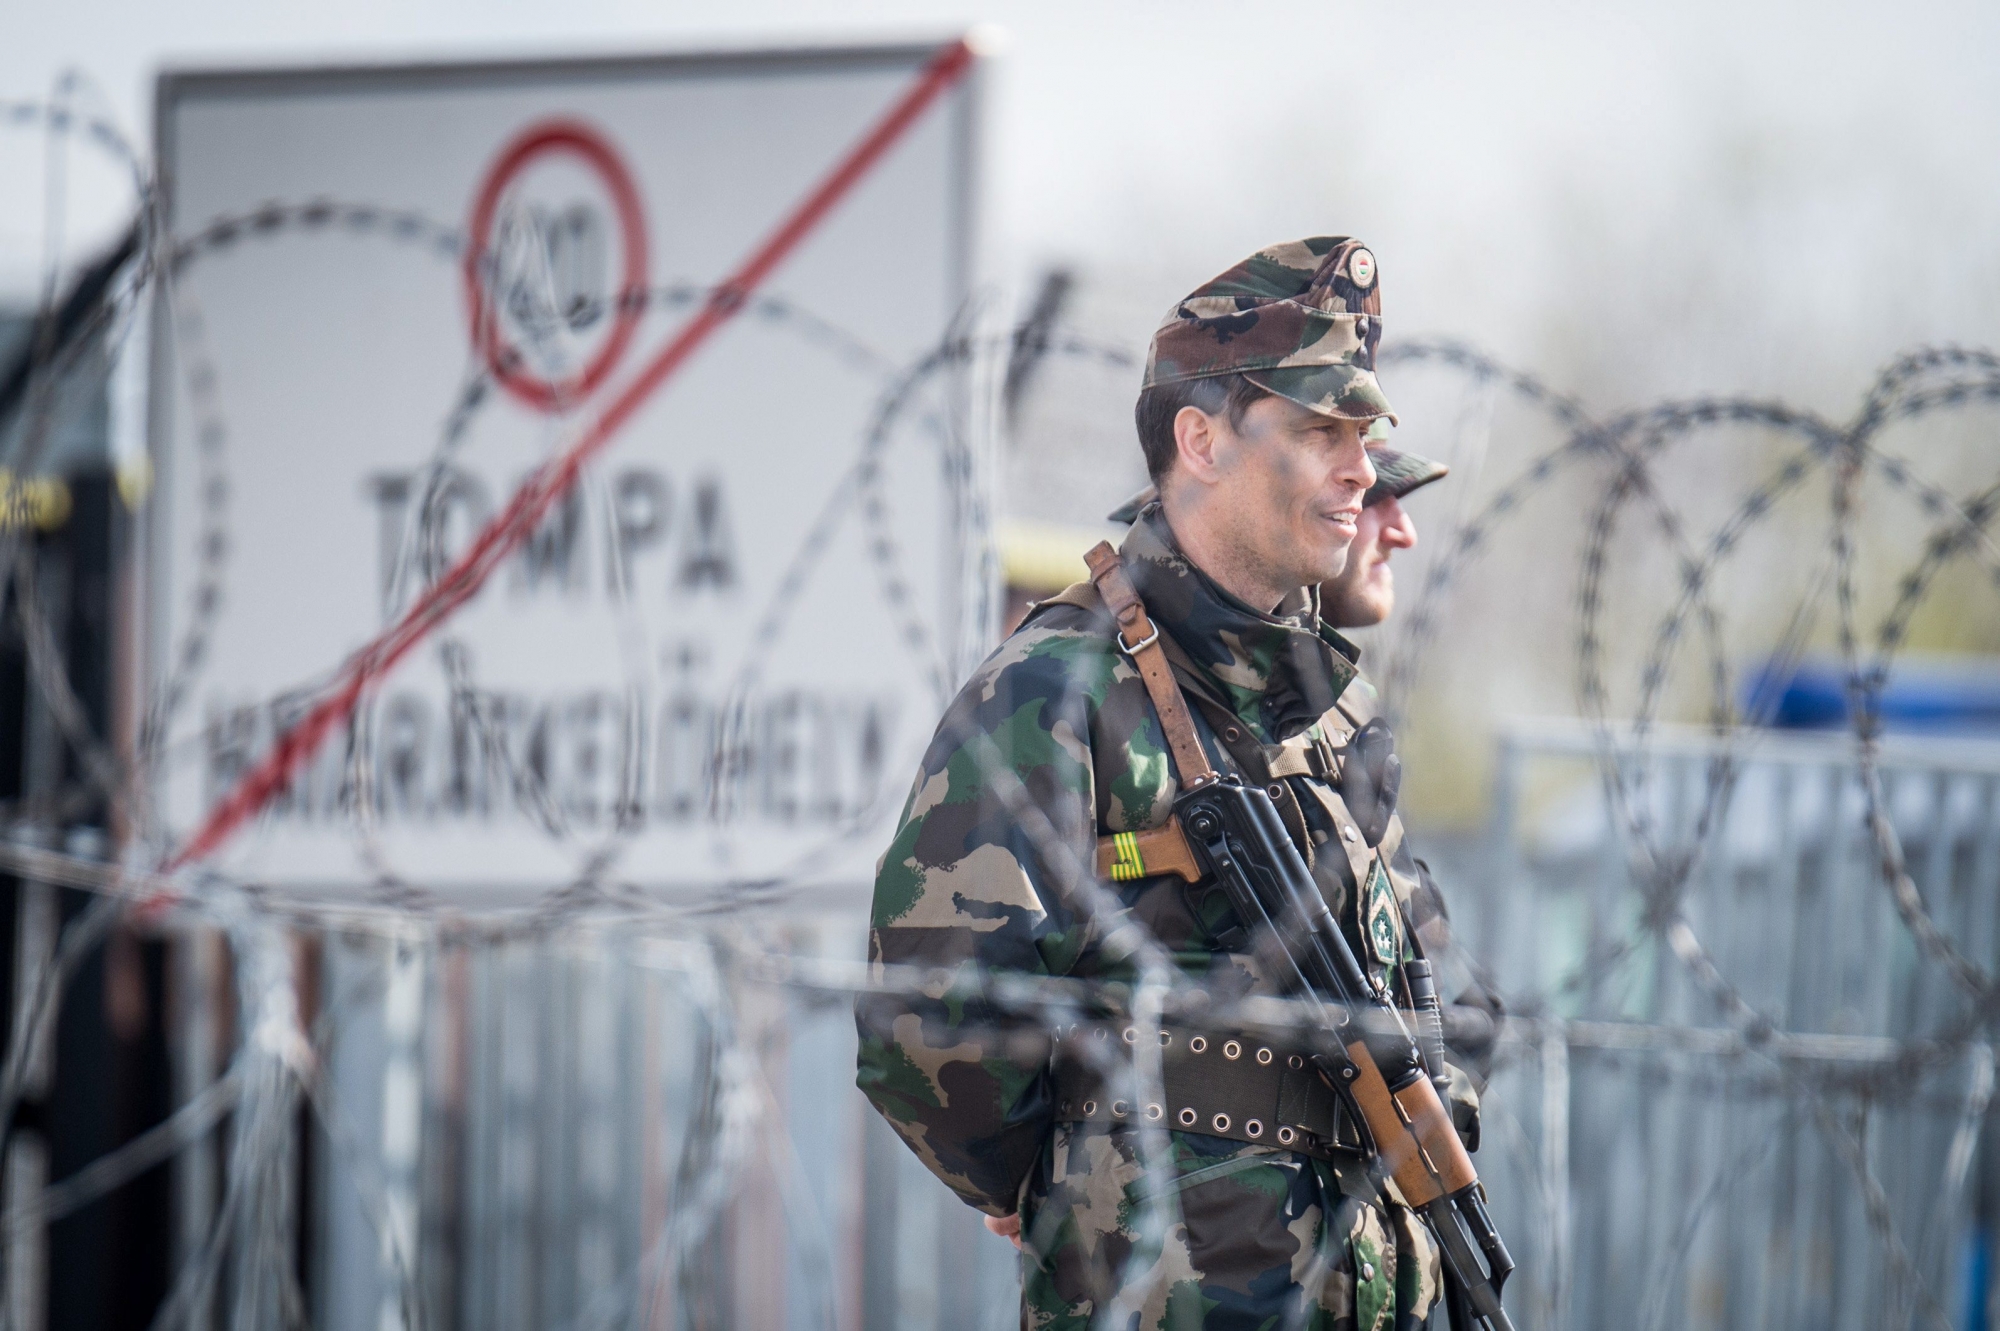 epa05891795 A Hungarian police officer patrols the enlarged barbed wire transit zone set up for migrants at the Hungary's southern border with Serbia near Tompa, 169 kms southeast of Budapest, Hungary, 06 April 2017. The complex is one of two new detention centers for asylum seekers in the Hungarian transit zone and contains shipping containers that are used to automatically detain migrants in the transit zone while their claims are investigated.  EPA/SANDOR UJVARI HUNGARY OUT HUNGARY MIGRATION